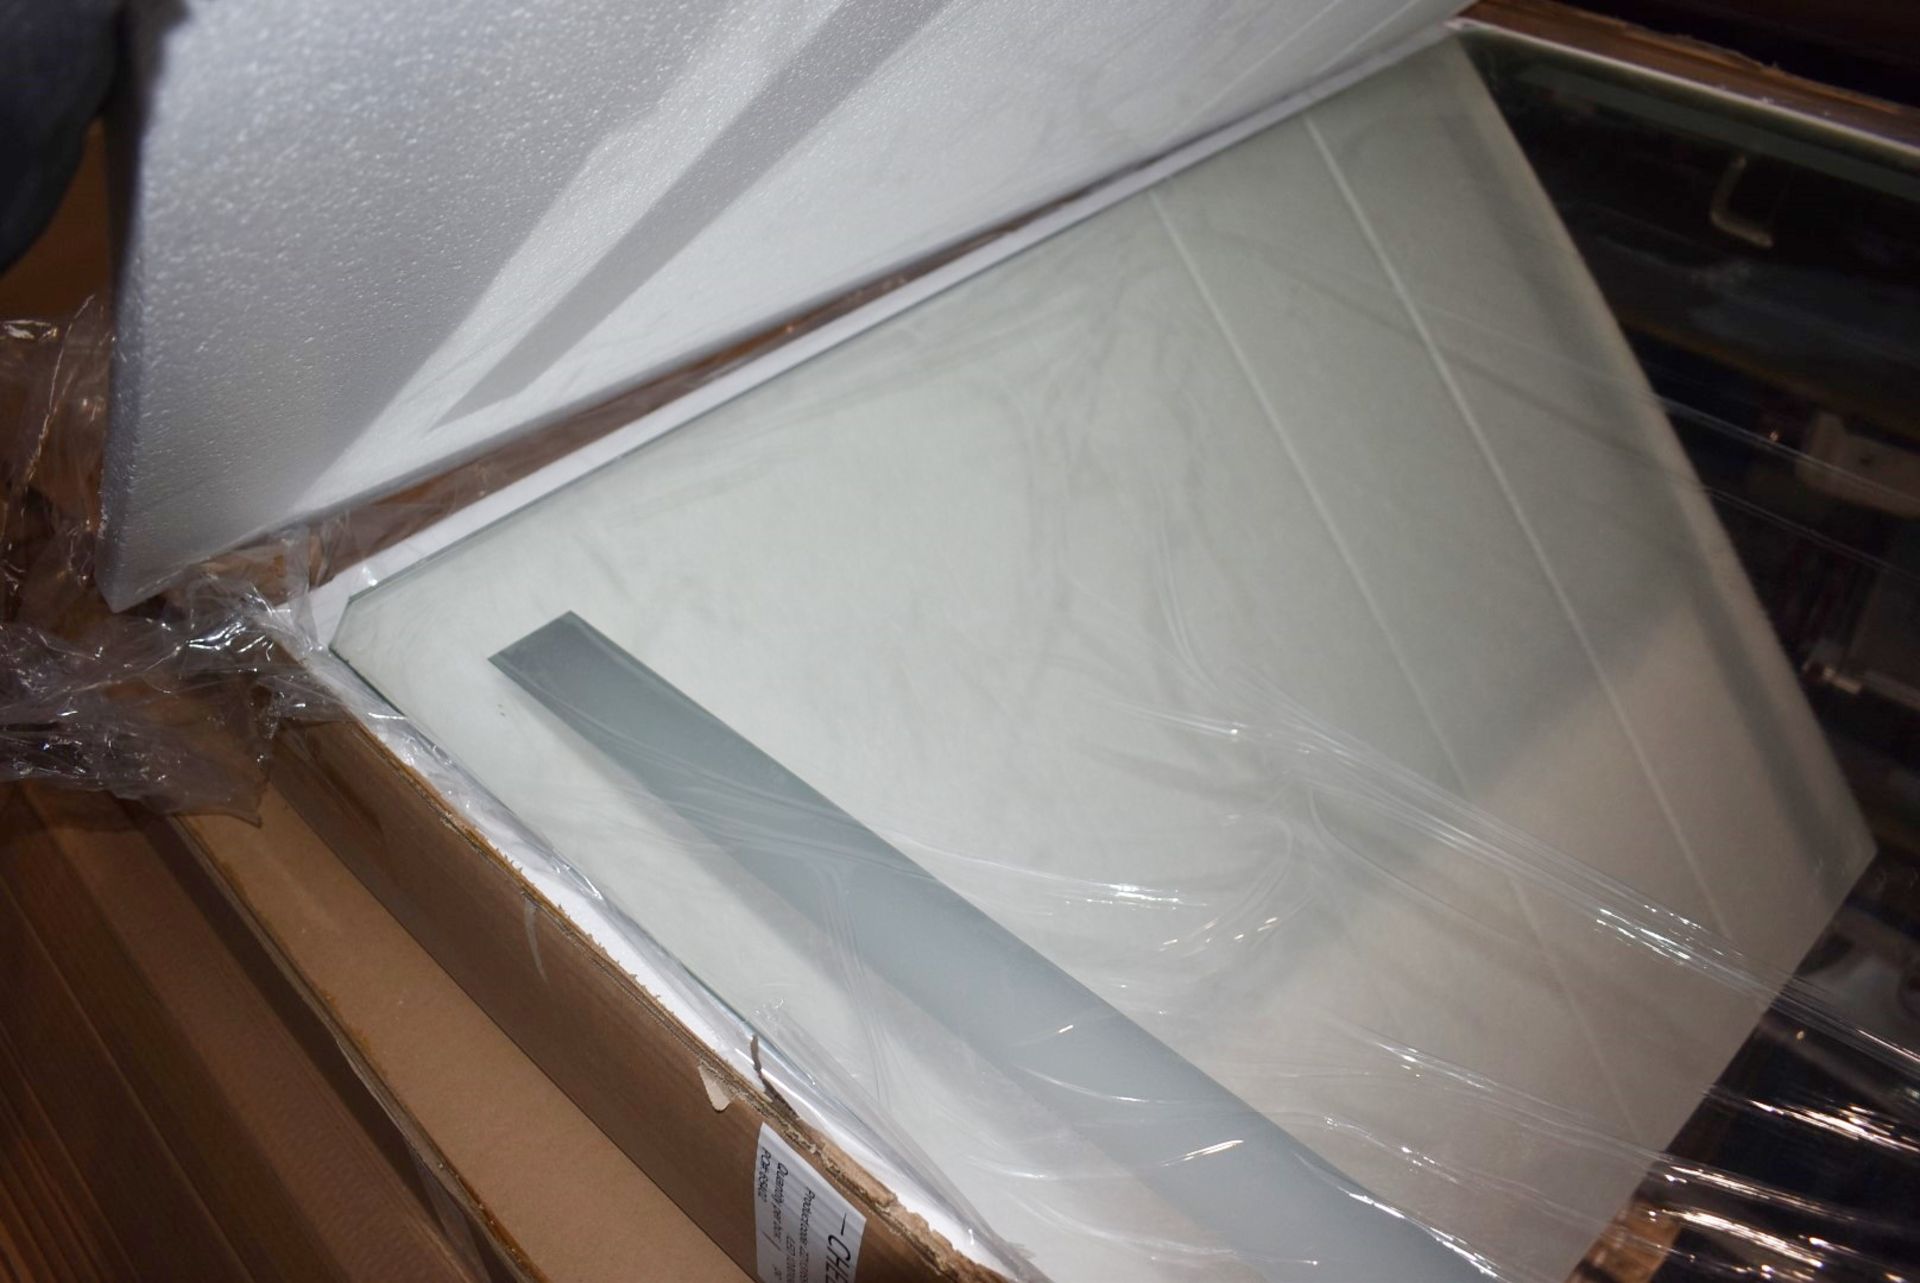 1 x Chelsom Large Illuminated LED Bathroom Mirror With Demister - Brand New Stock - As Used in Major - Image 7 of 13